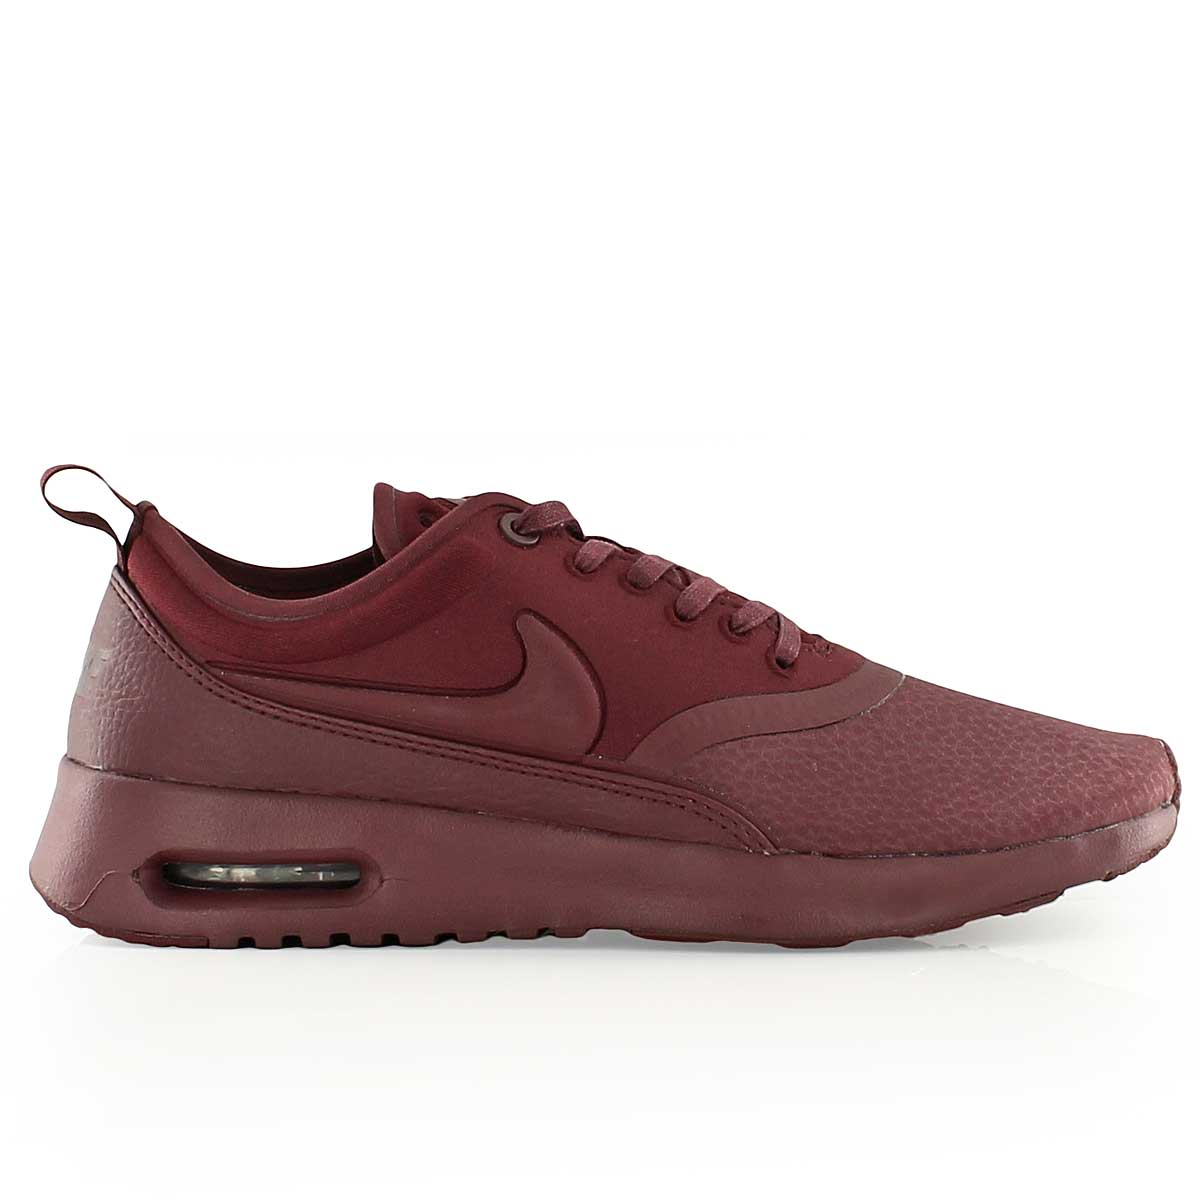 Buy W NIKE AIR MAX THEA ULTRA PRM for N 